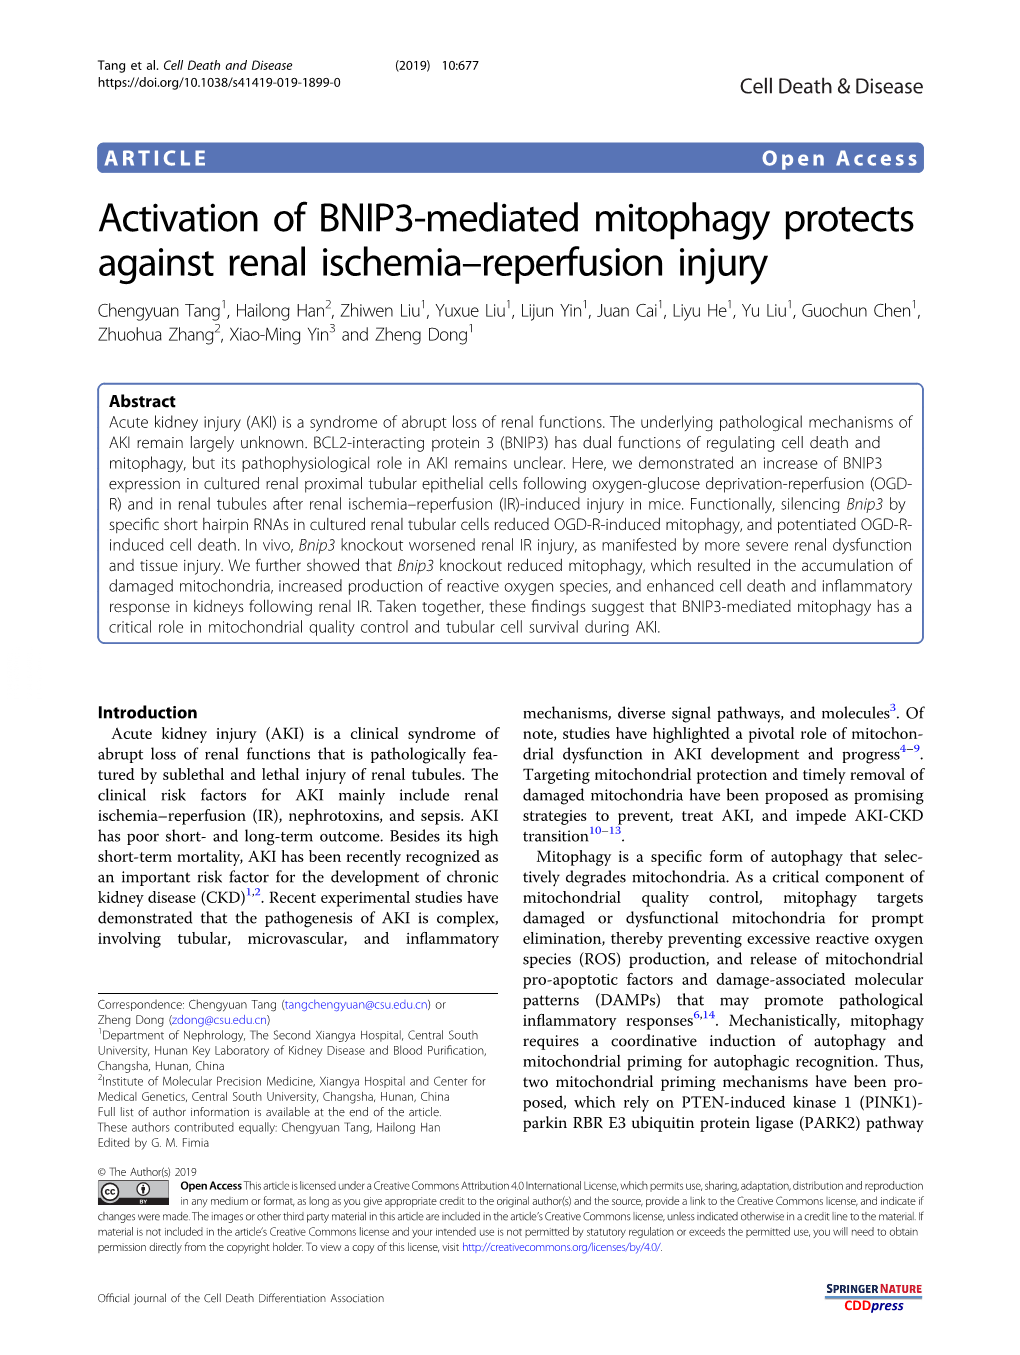 Activation of BNIP3-Mediated Mitophagy Protects Against Renal